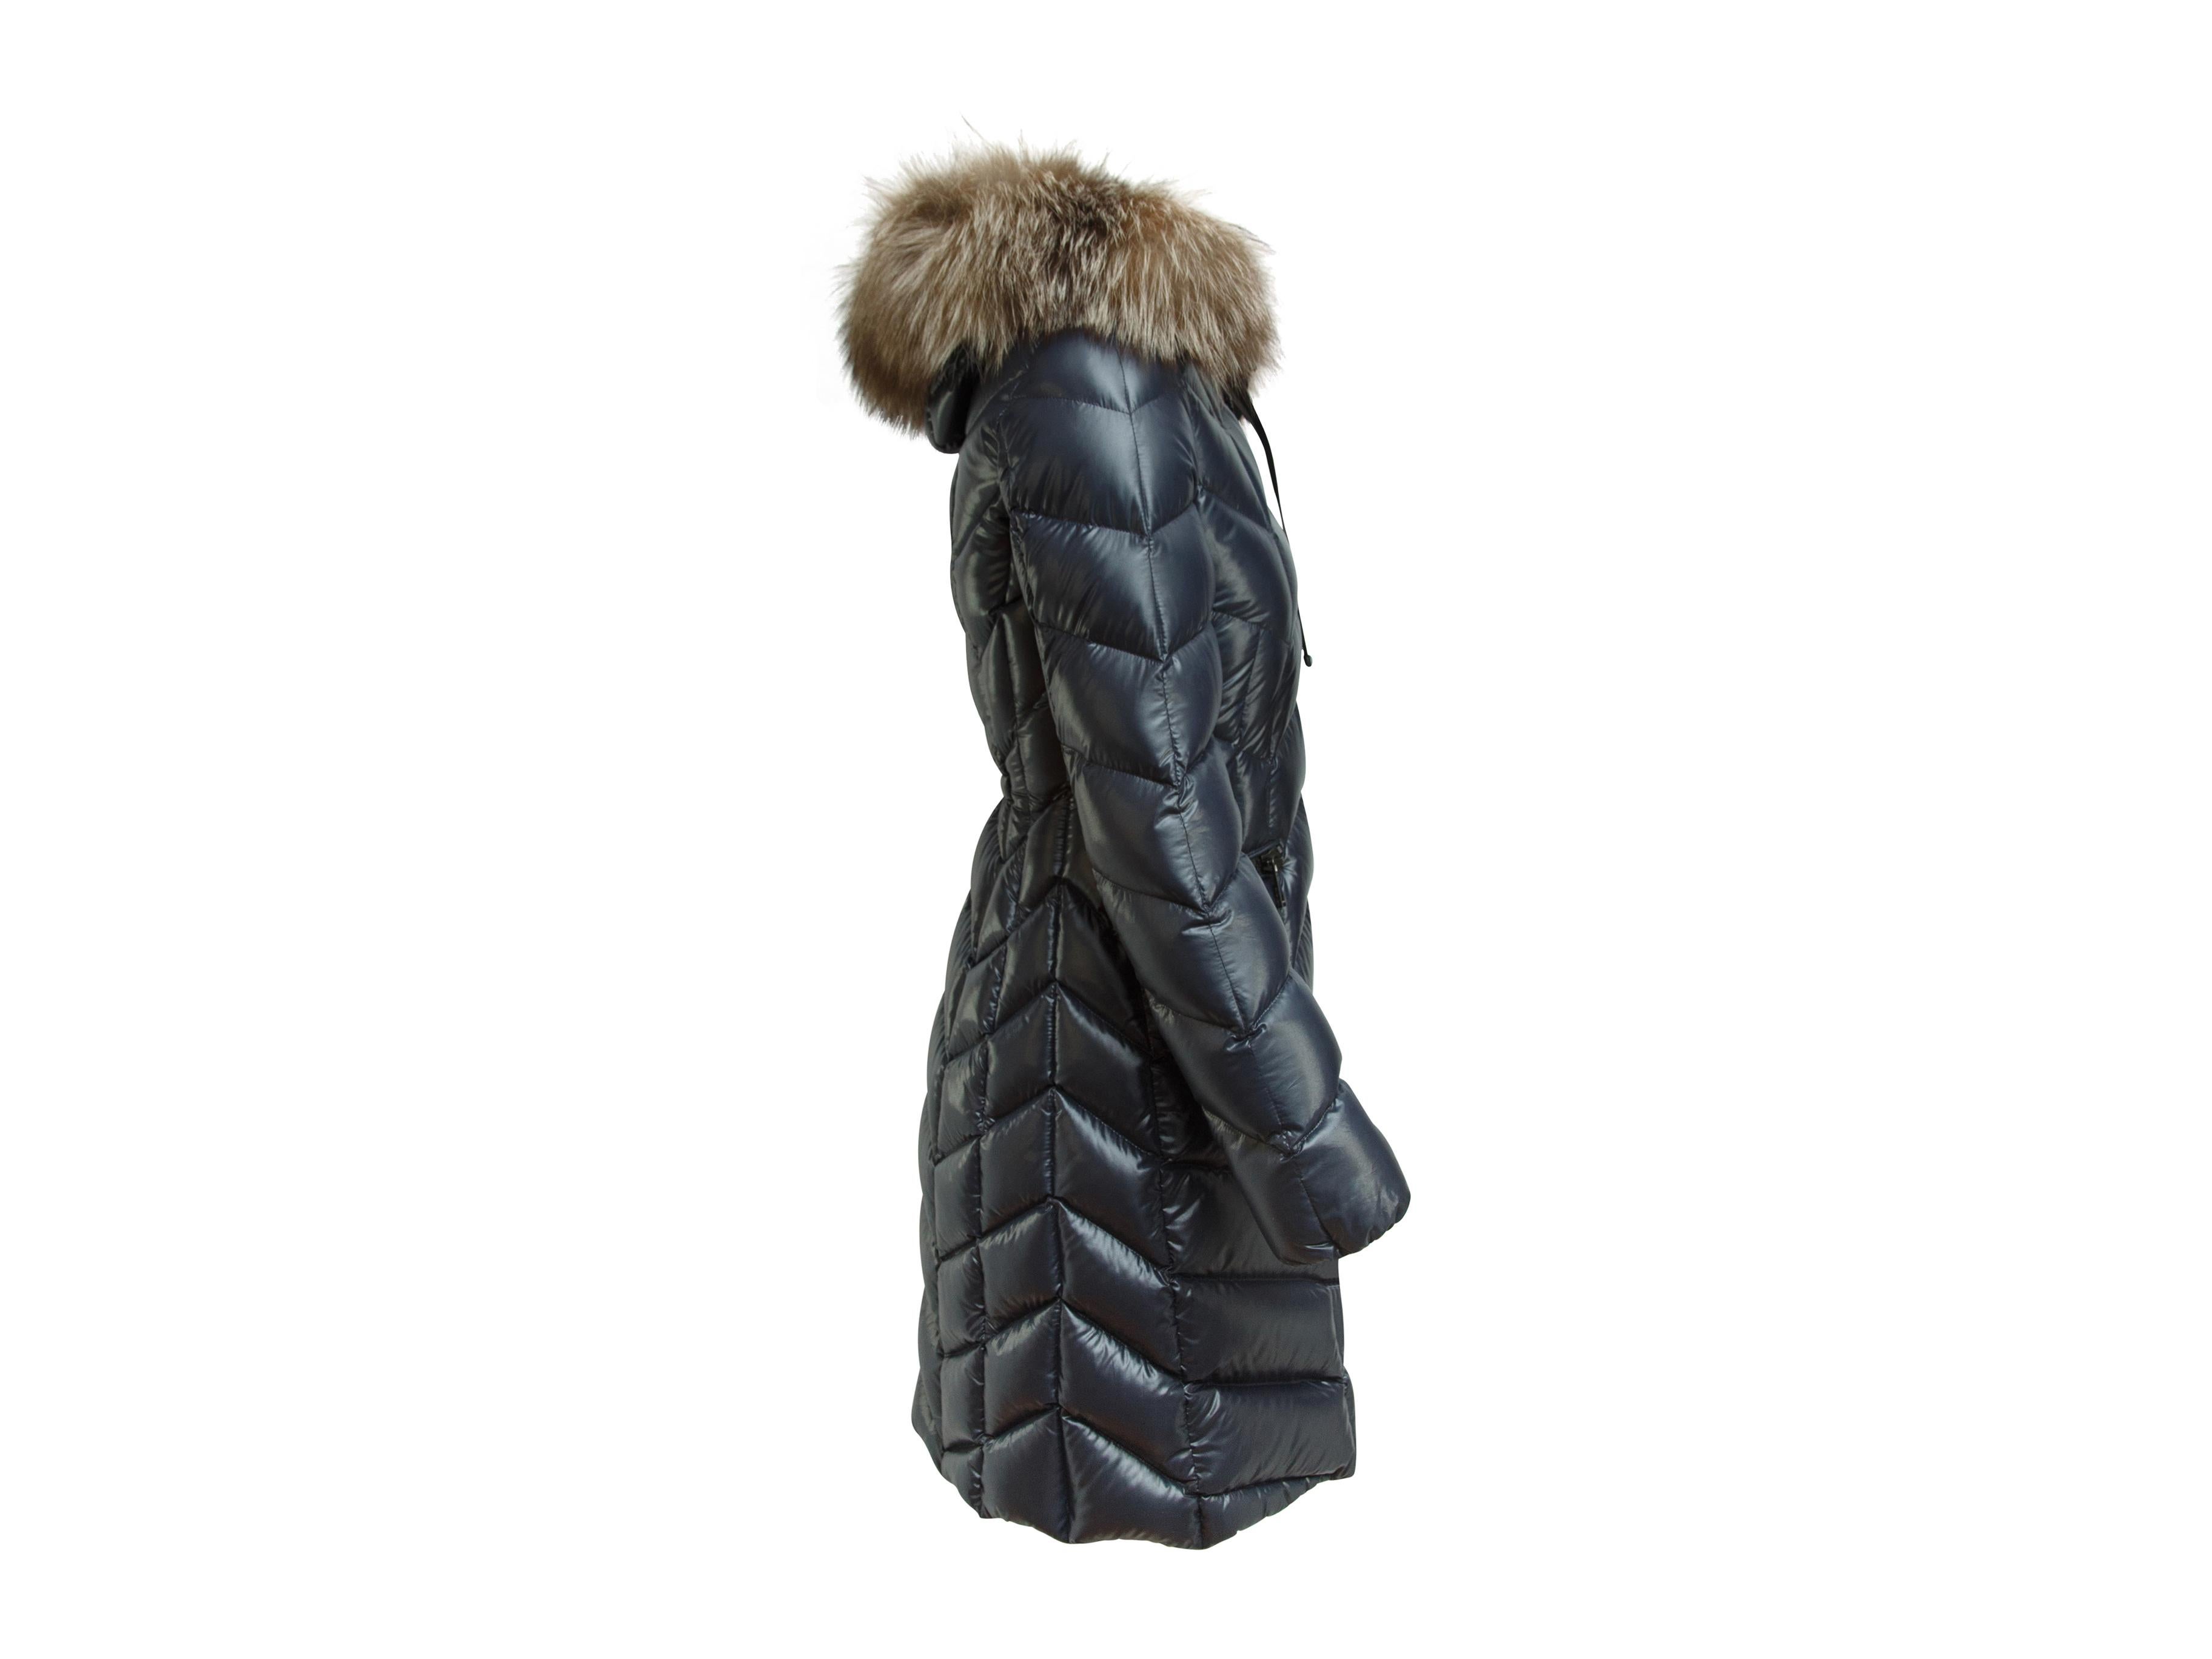 Product details:  Navy blue puffer coat by Moncler.  Fox fur-trimmed hood with drawstring.  Long sleeves.  Zip-front closure.  Waist zip pockets.  32